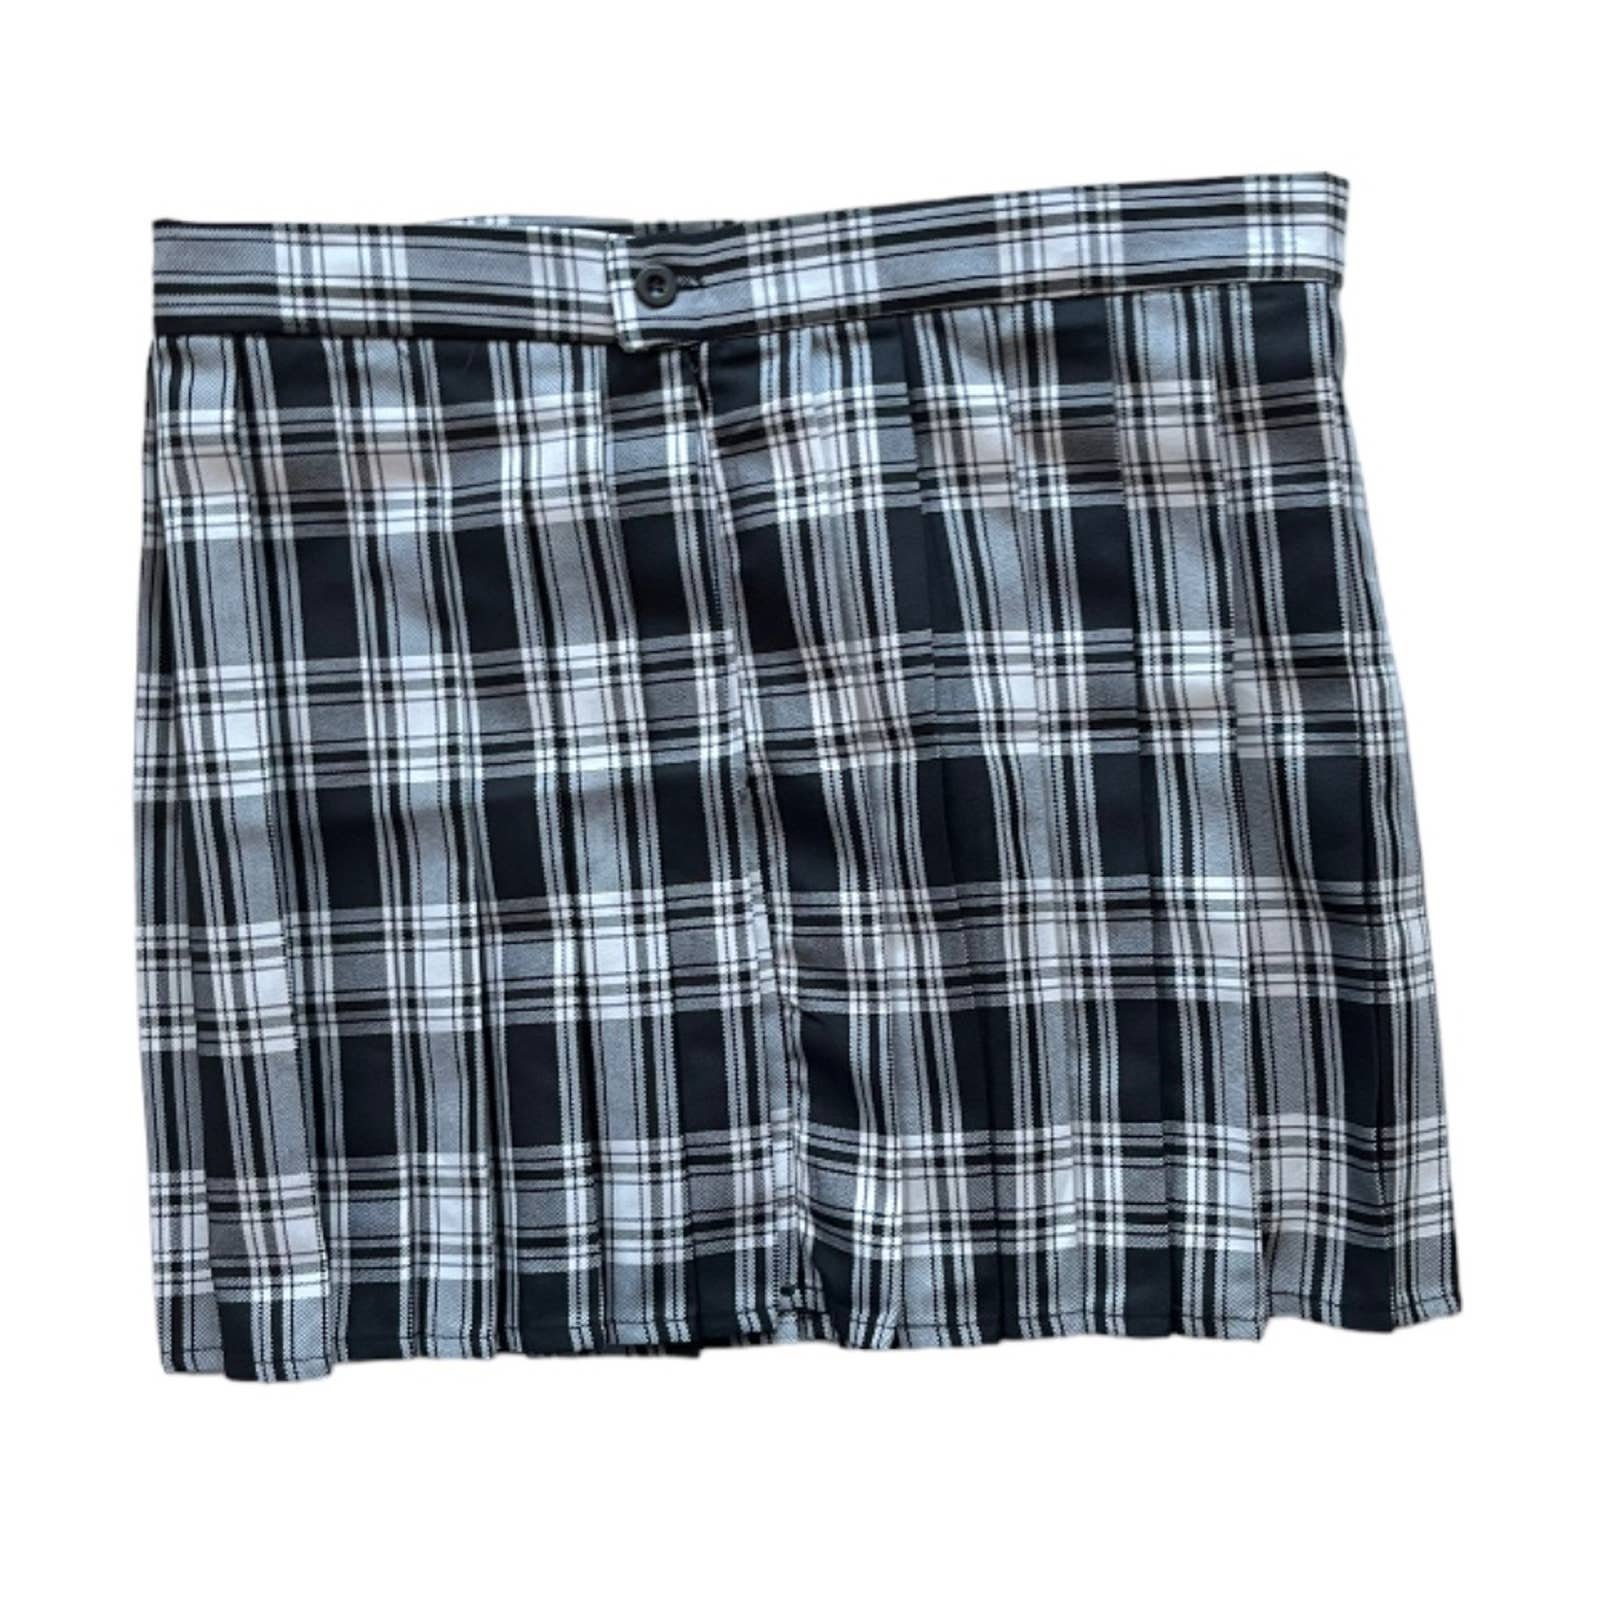 Cheap Mini Skirt, Hug Sunshine, Black and White Plaid Pleated Skirt, Y2K pD40QYmgS outlet online shop